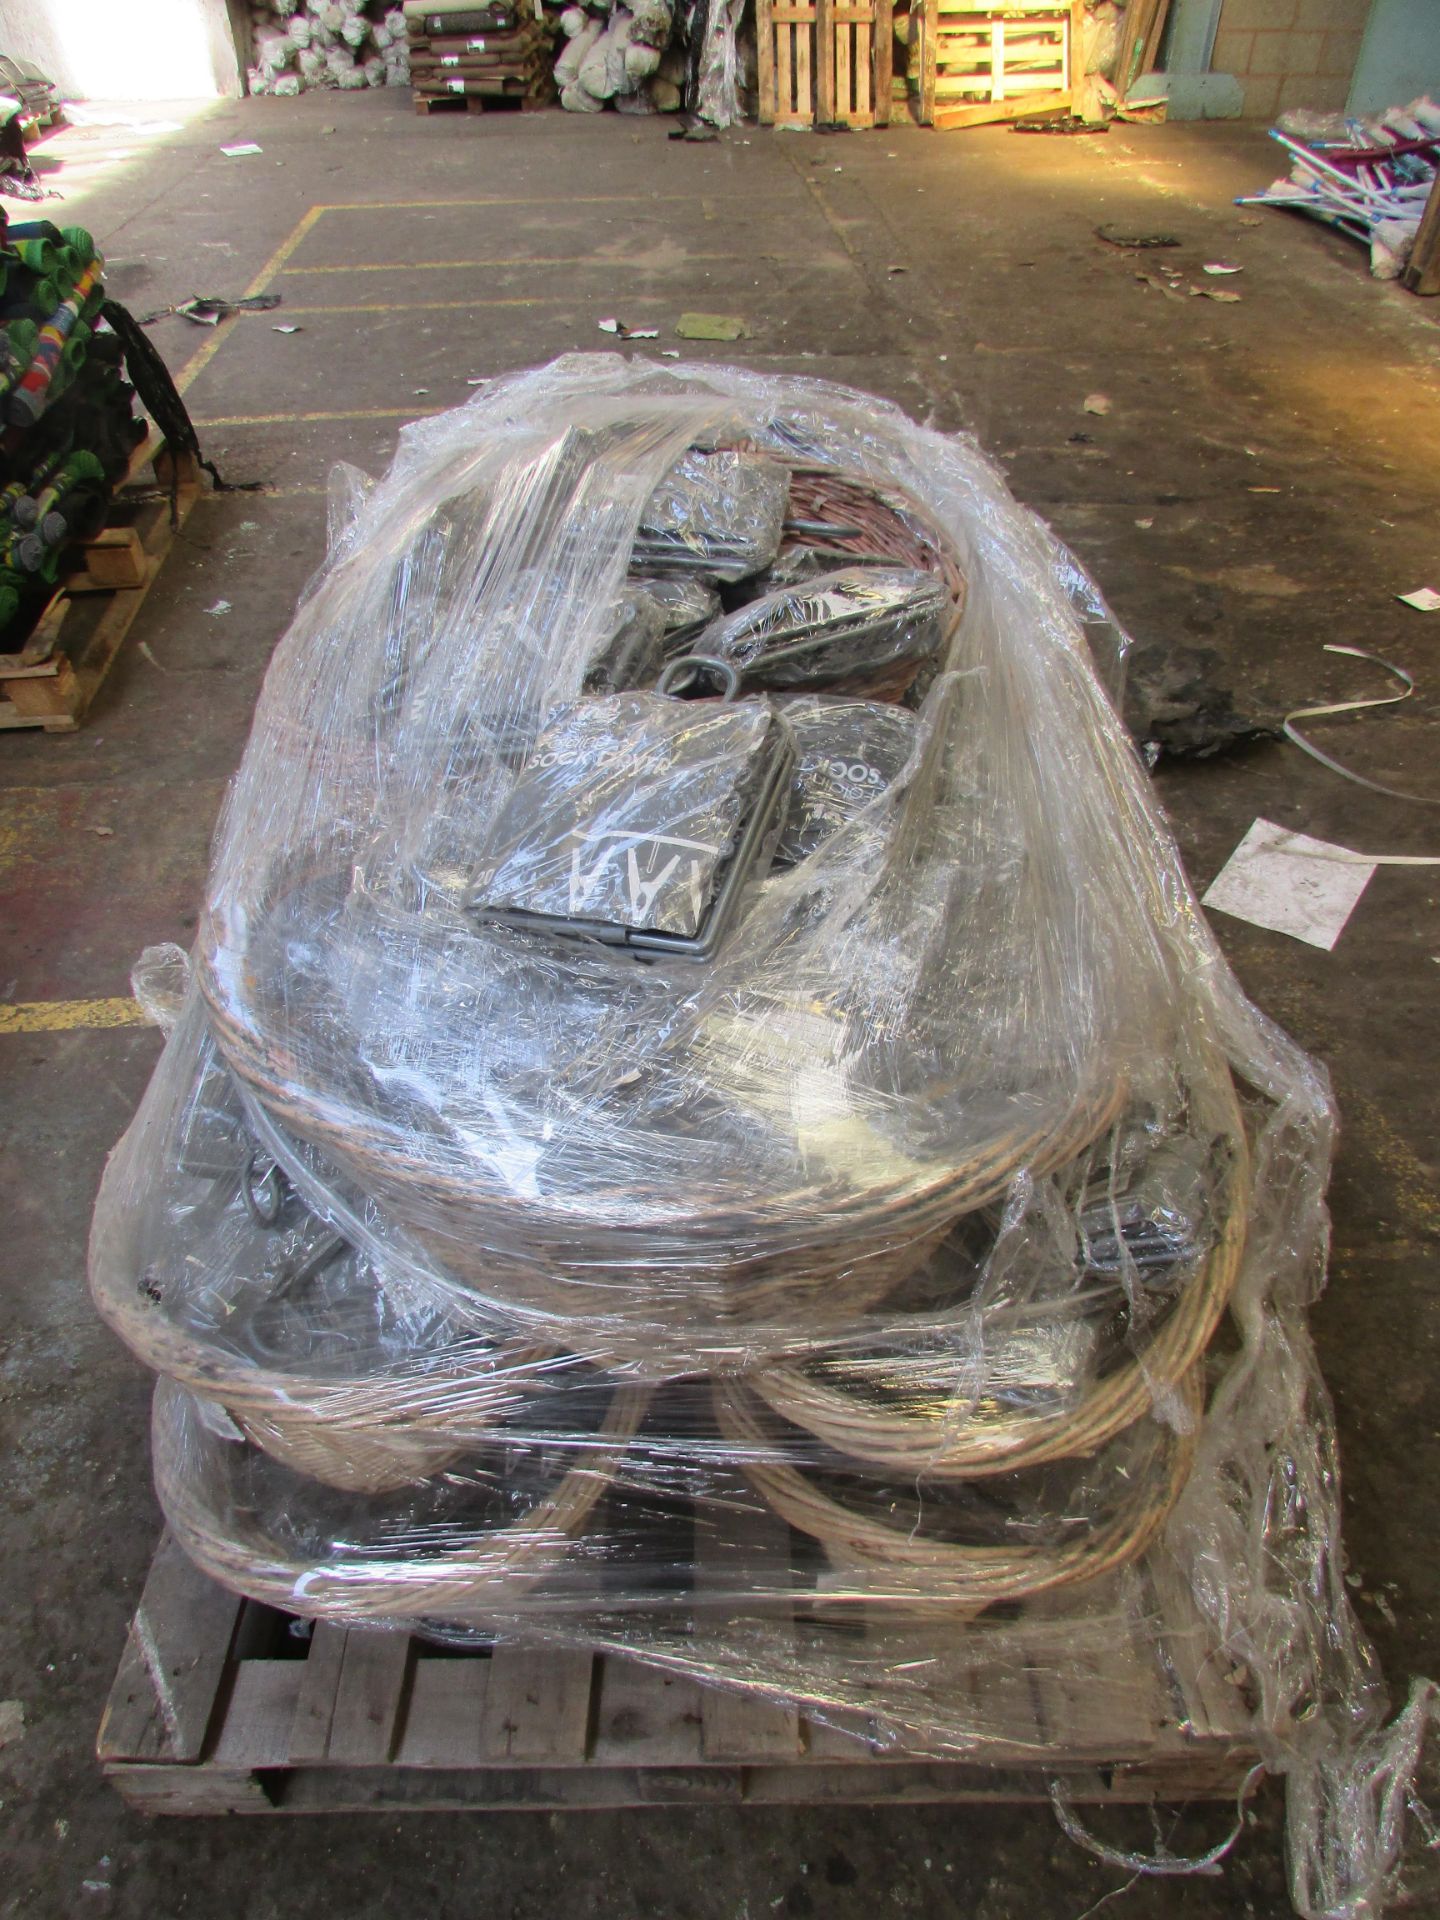 A Pallet Of Laundry Baskets & Sock Dryers